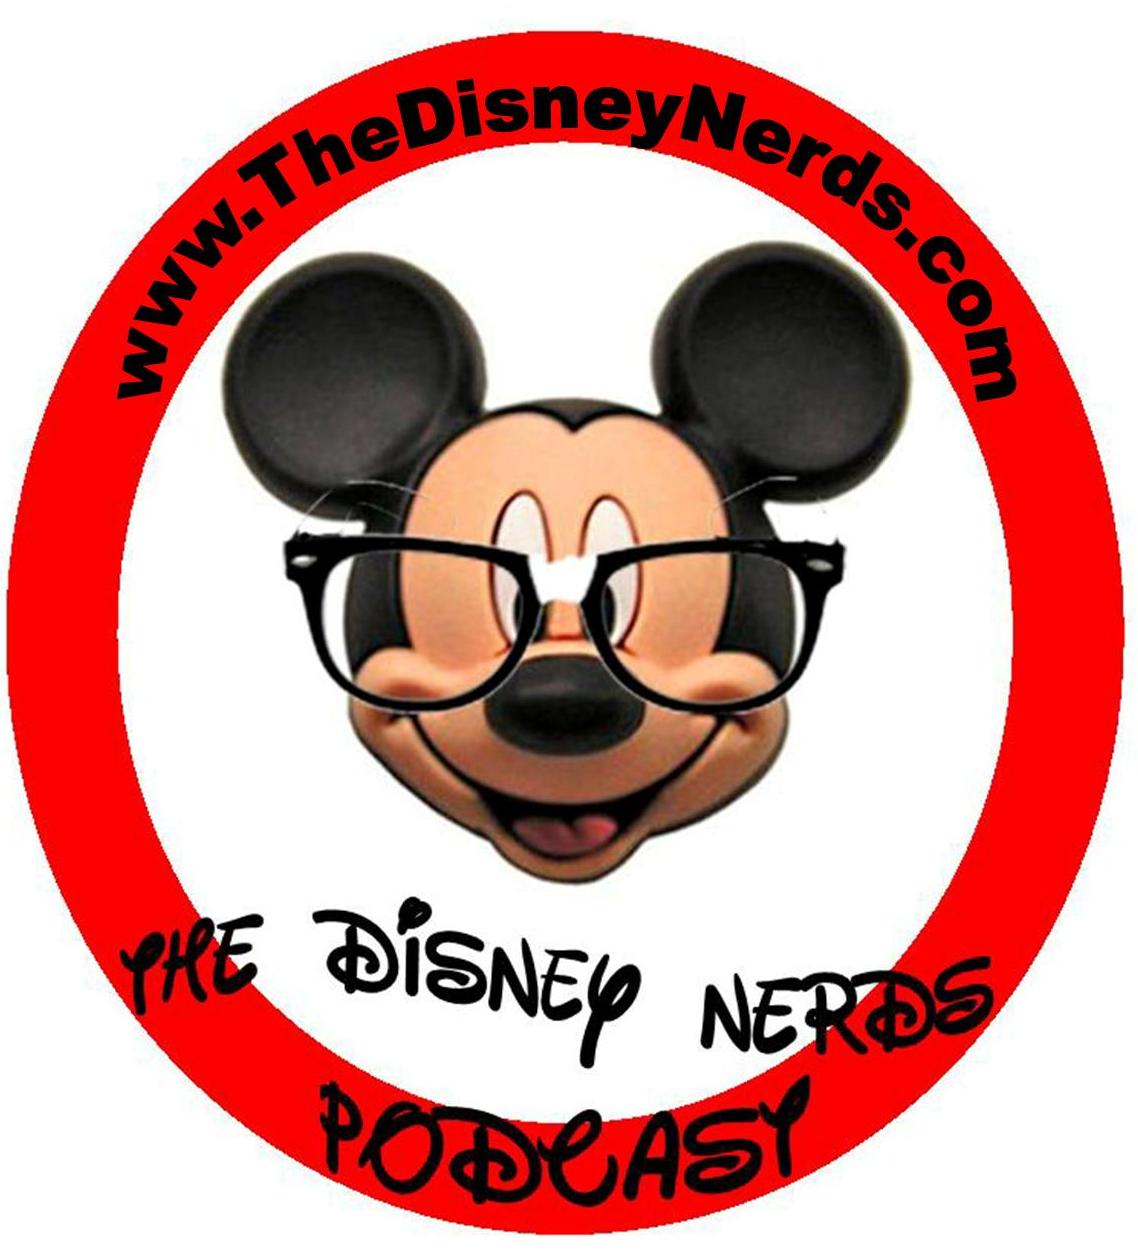 Show # 40 of the Disney Nerds Podcast